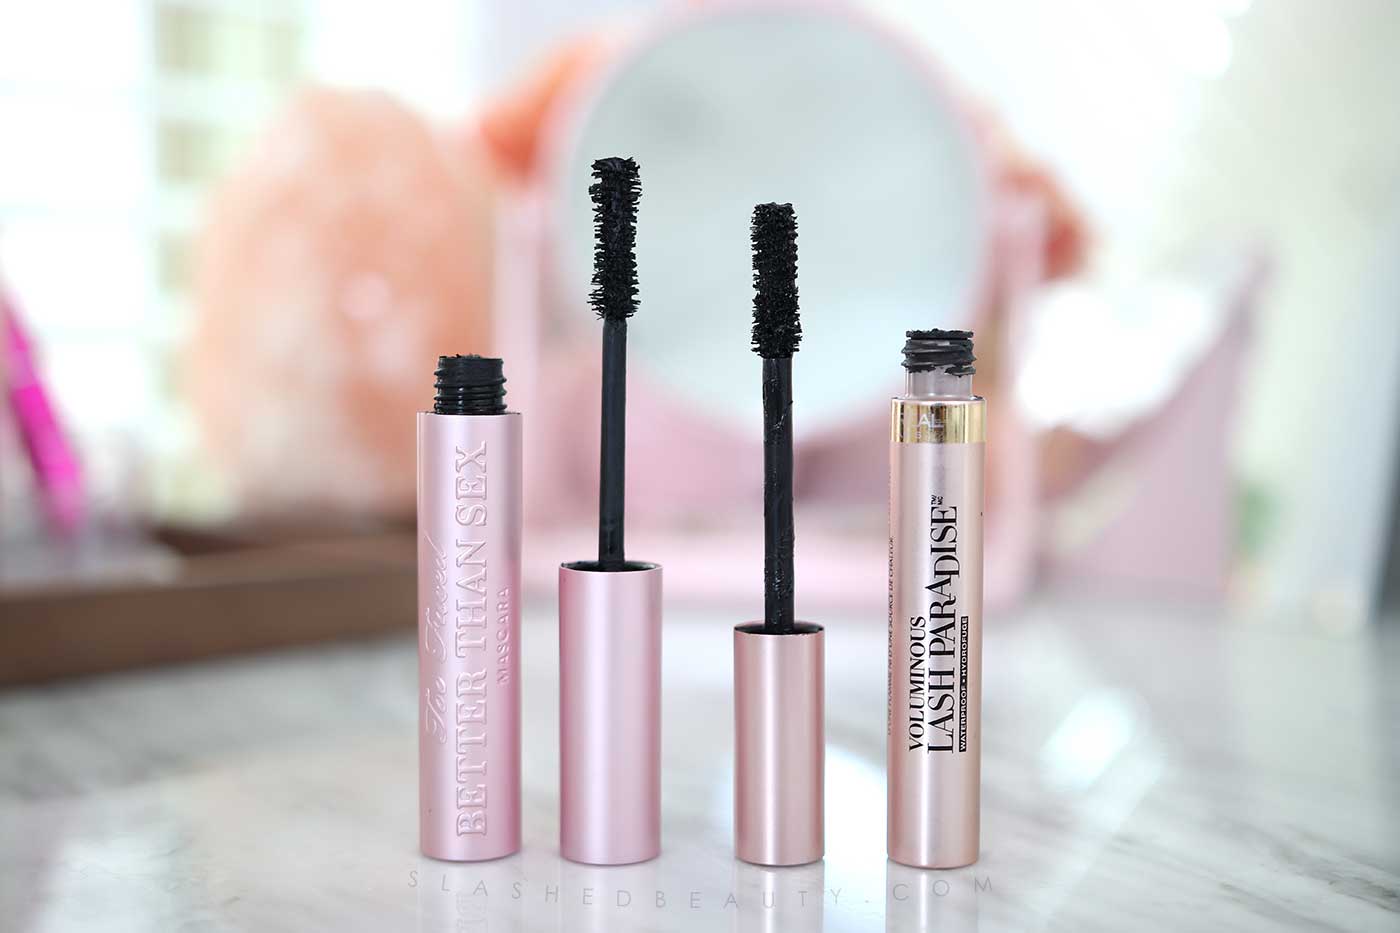 Two Drugstore Dupes for Too Faced Better Than Sex Mascara | L'Oreal Lash Paradise vs. Too Faced Better Than Sex Mascara | Slashed Beauty